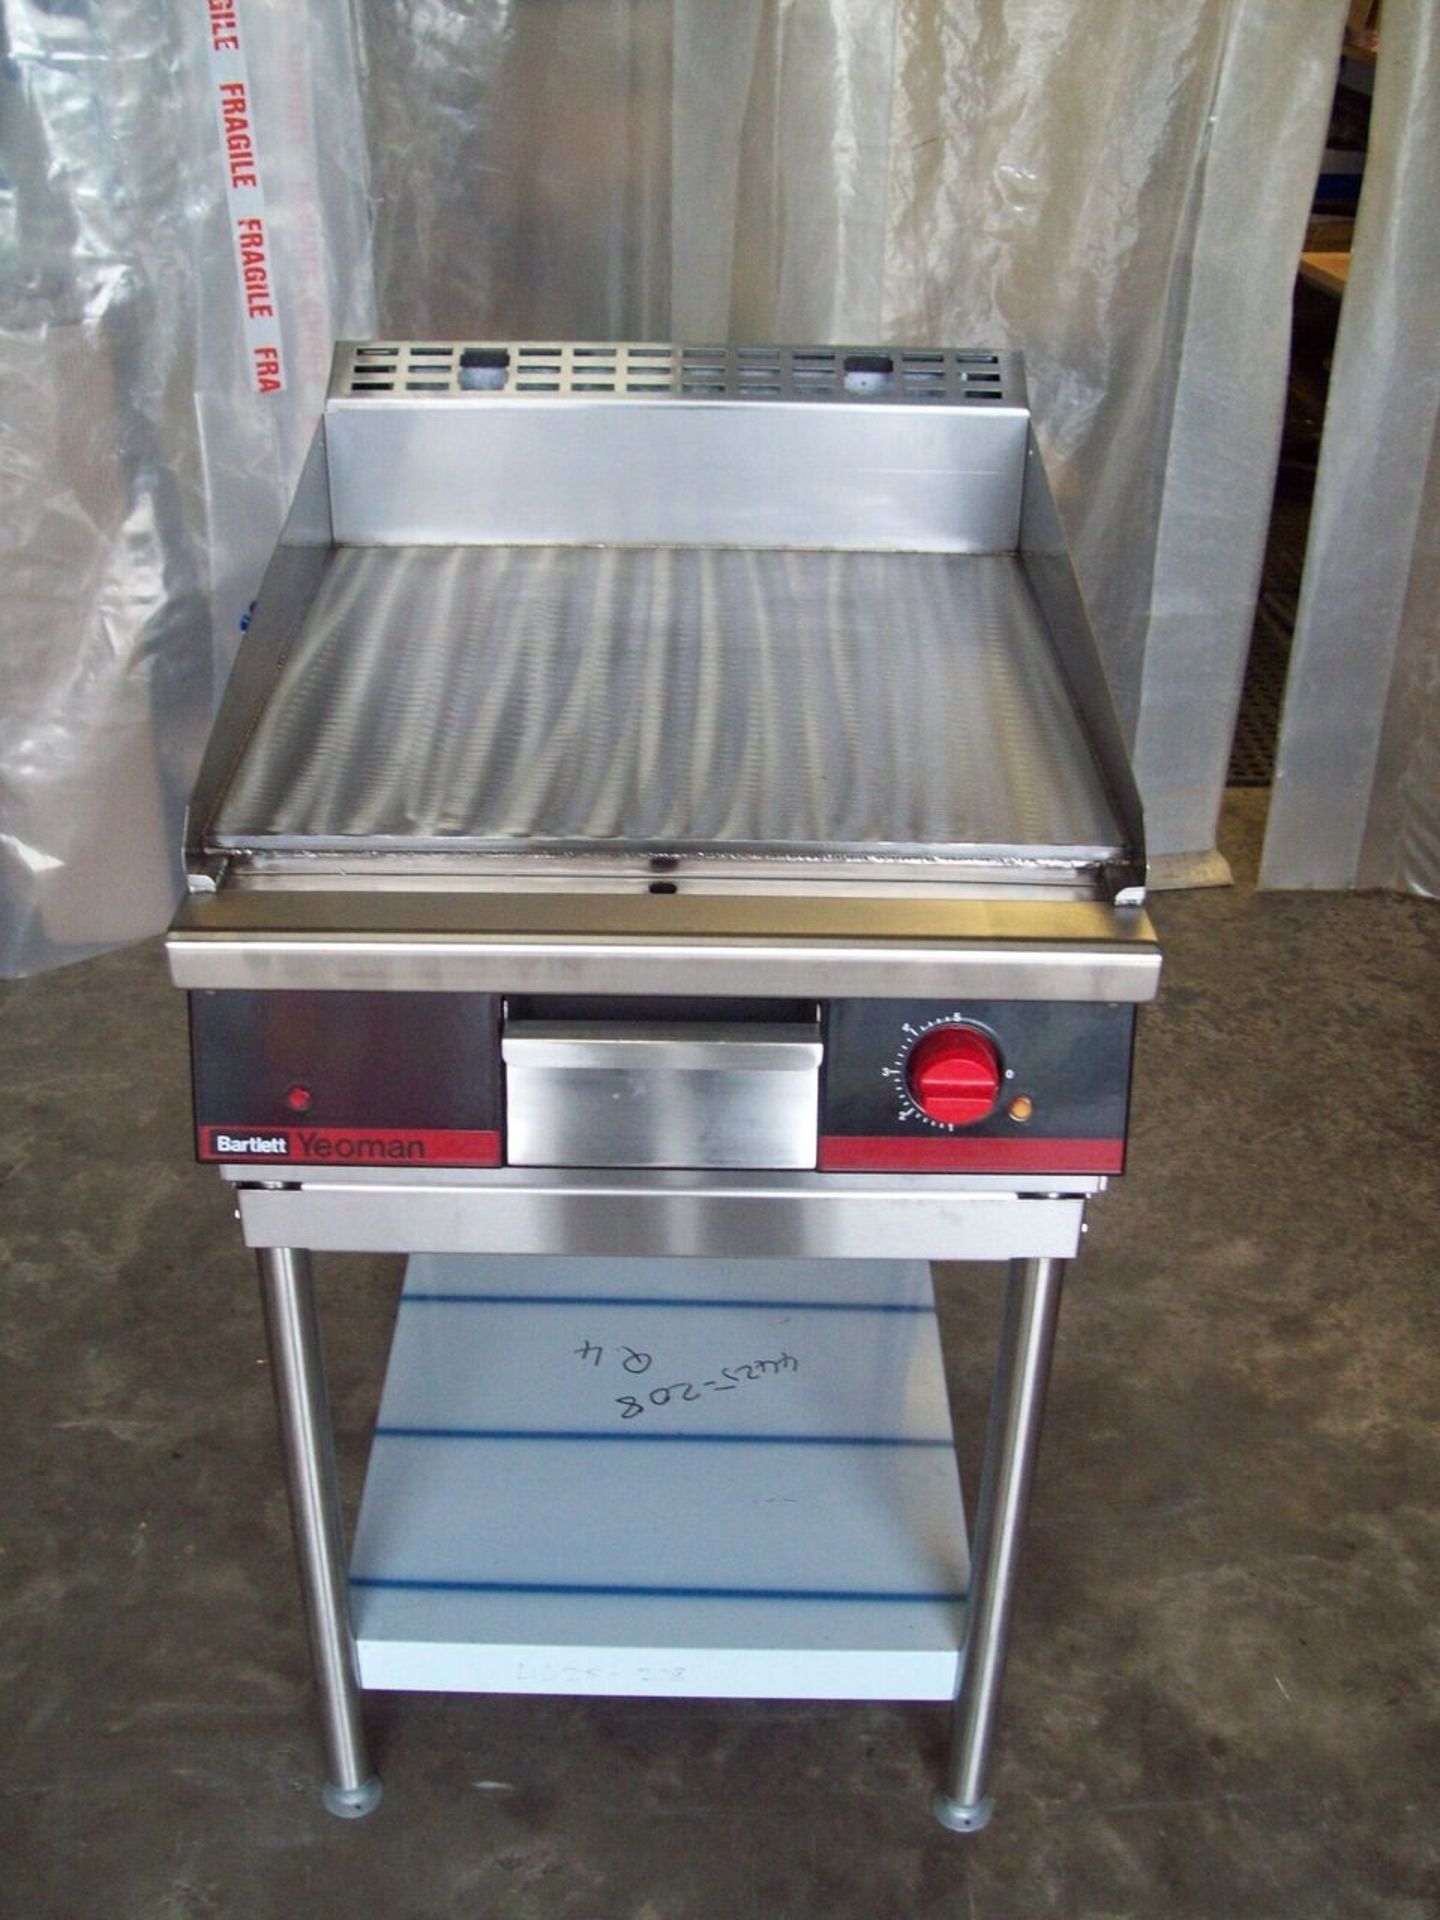 Bartlett Yeoman electric Griddle on stand ( 415v 3ph 50hz - 9kw ) dxwxh 730x600x1090 o/a 100kg weigh